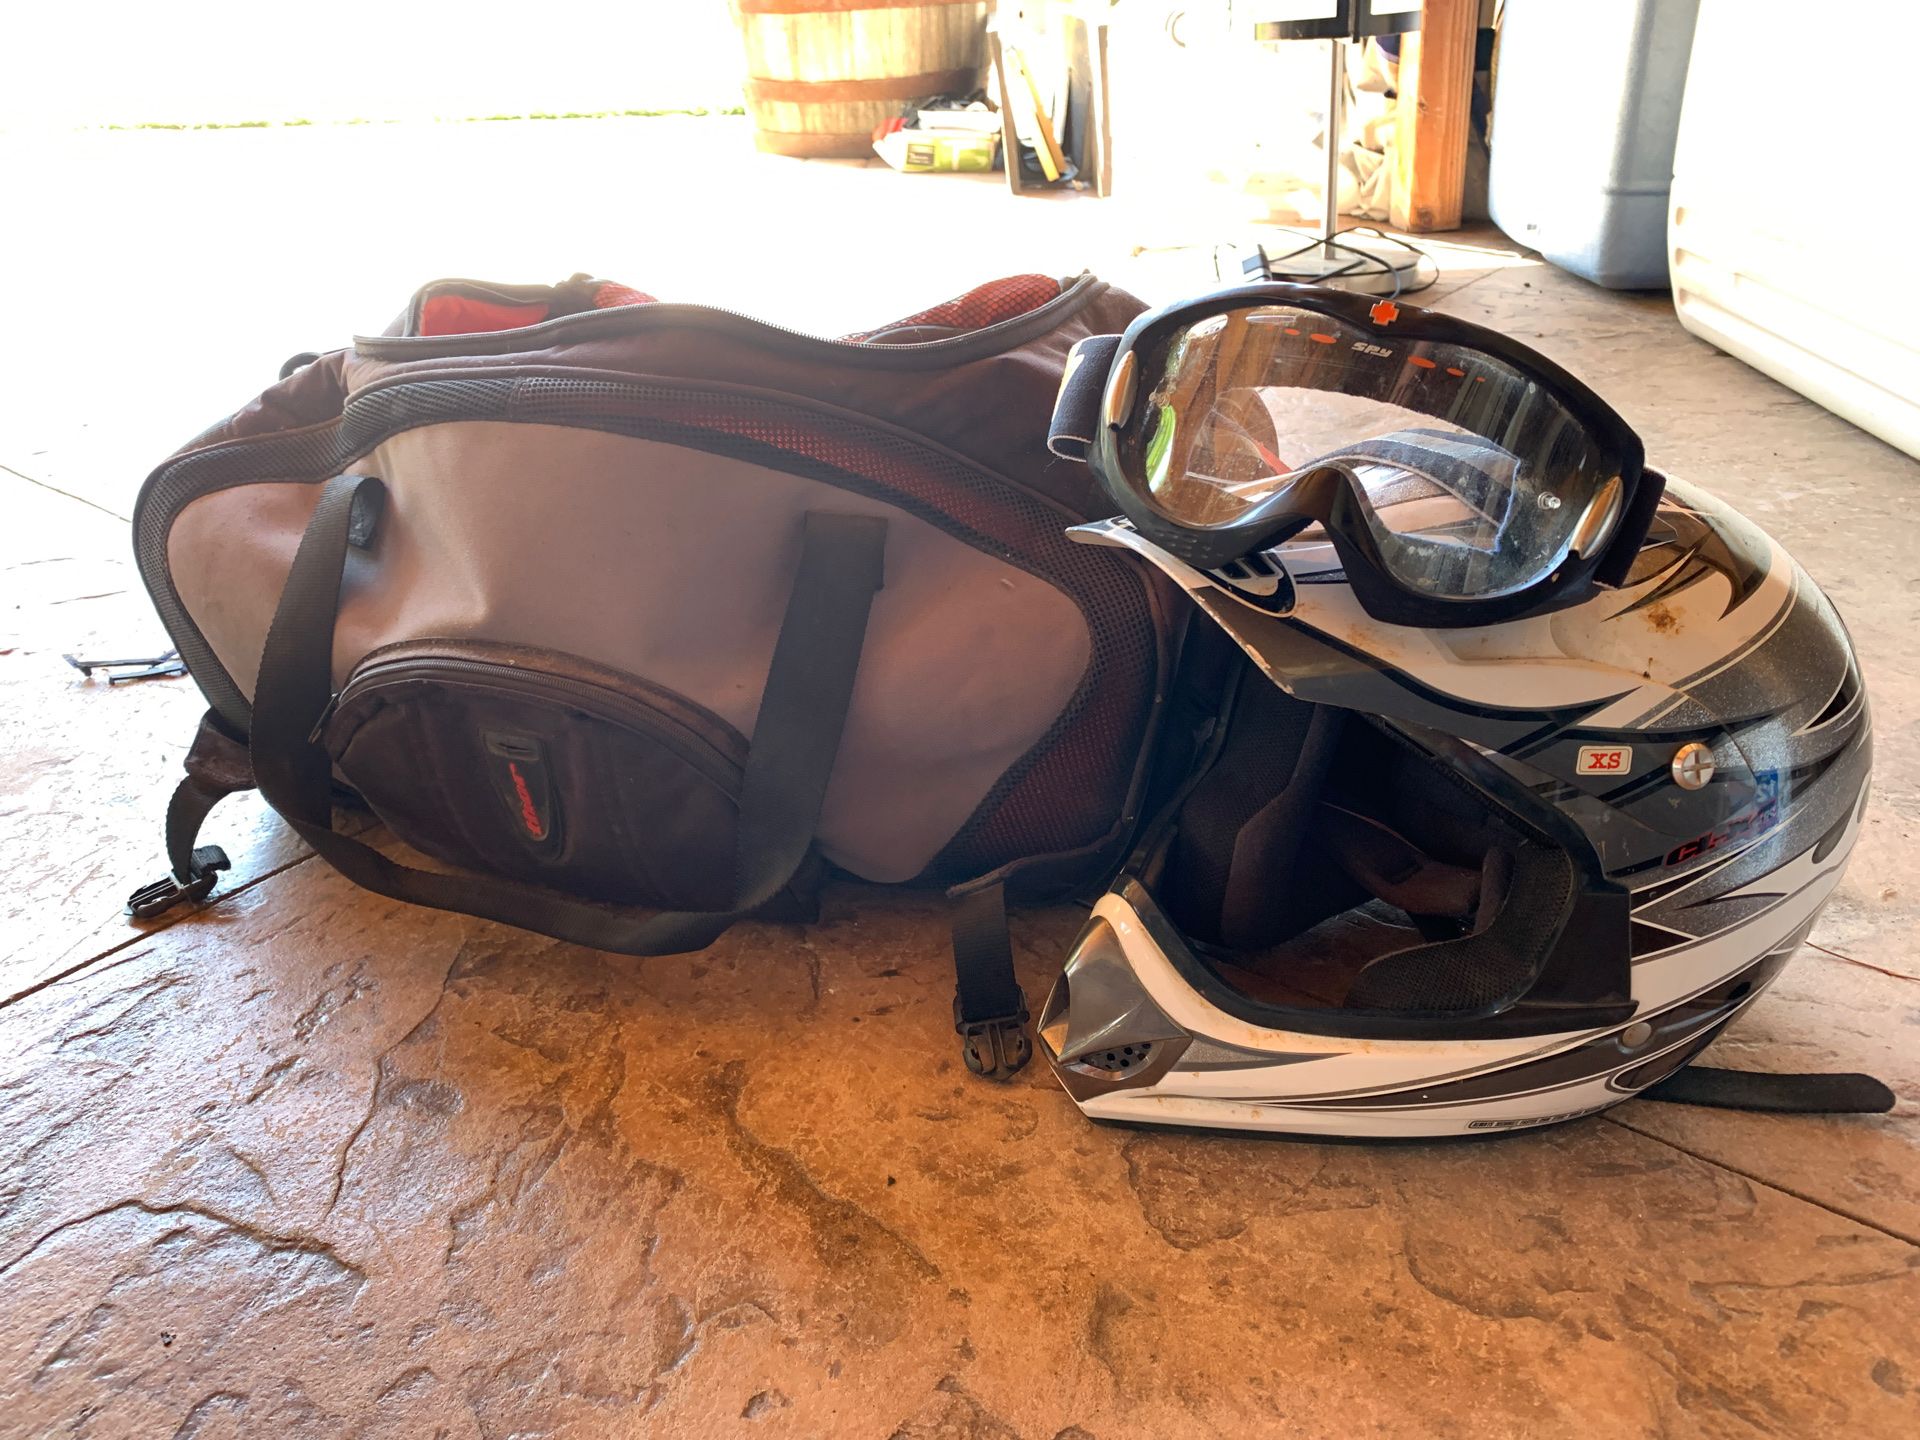 Helmet XS, for kids or small head googles and gear bag!